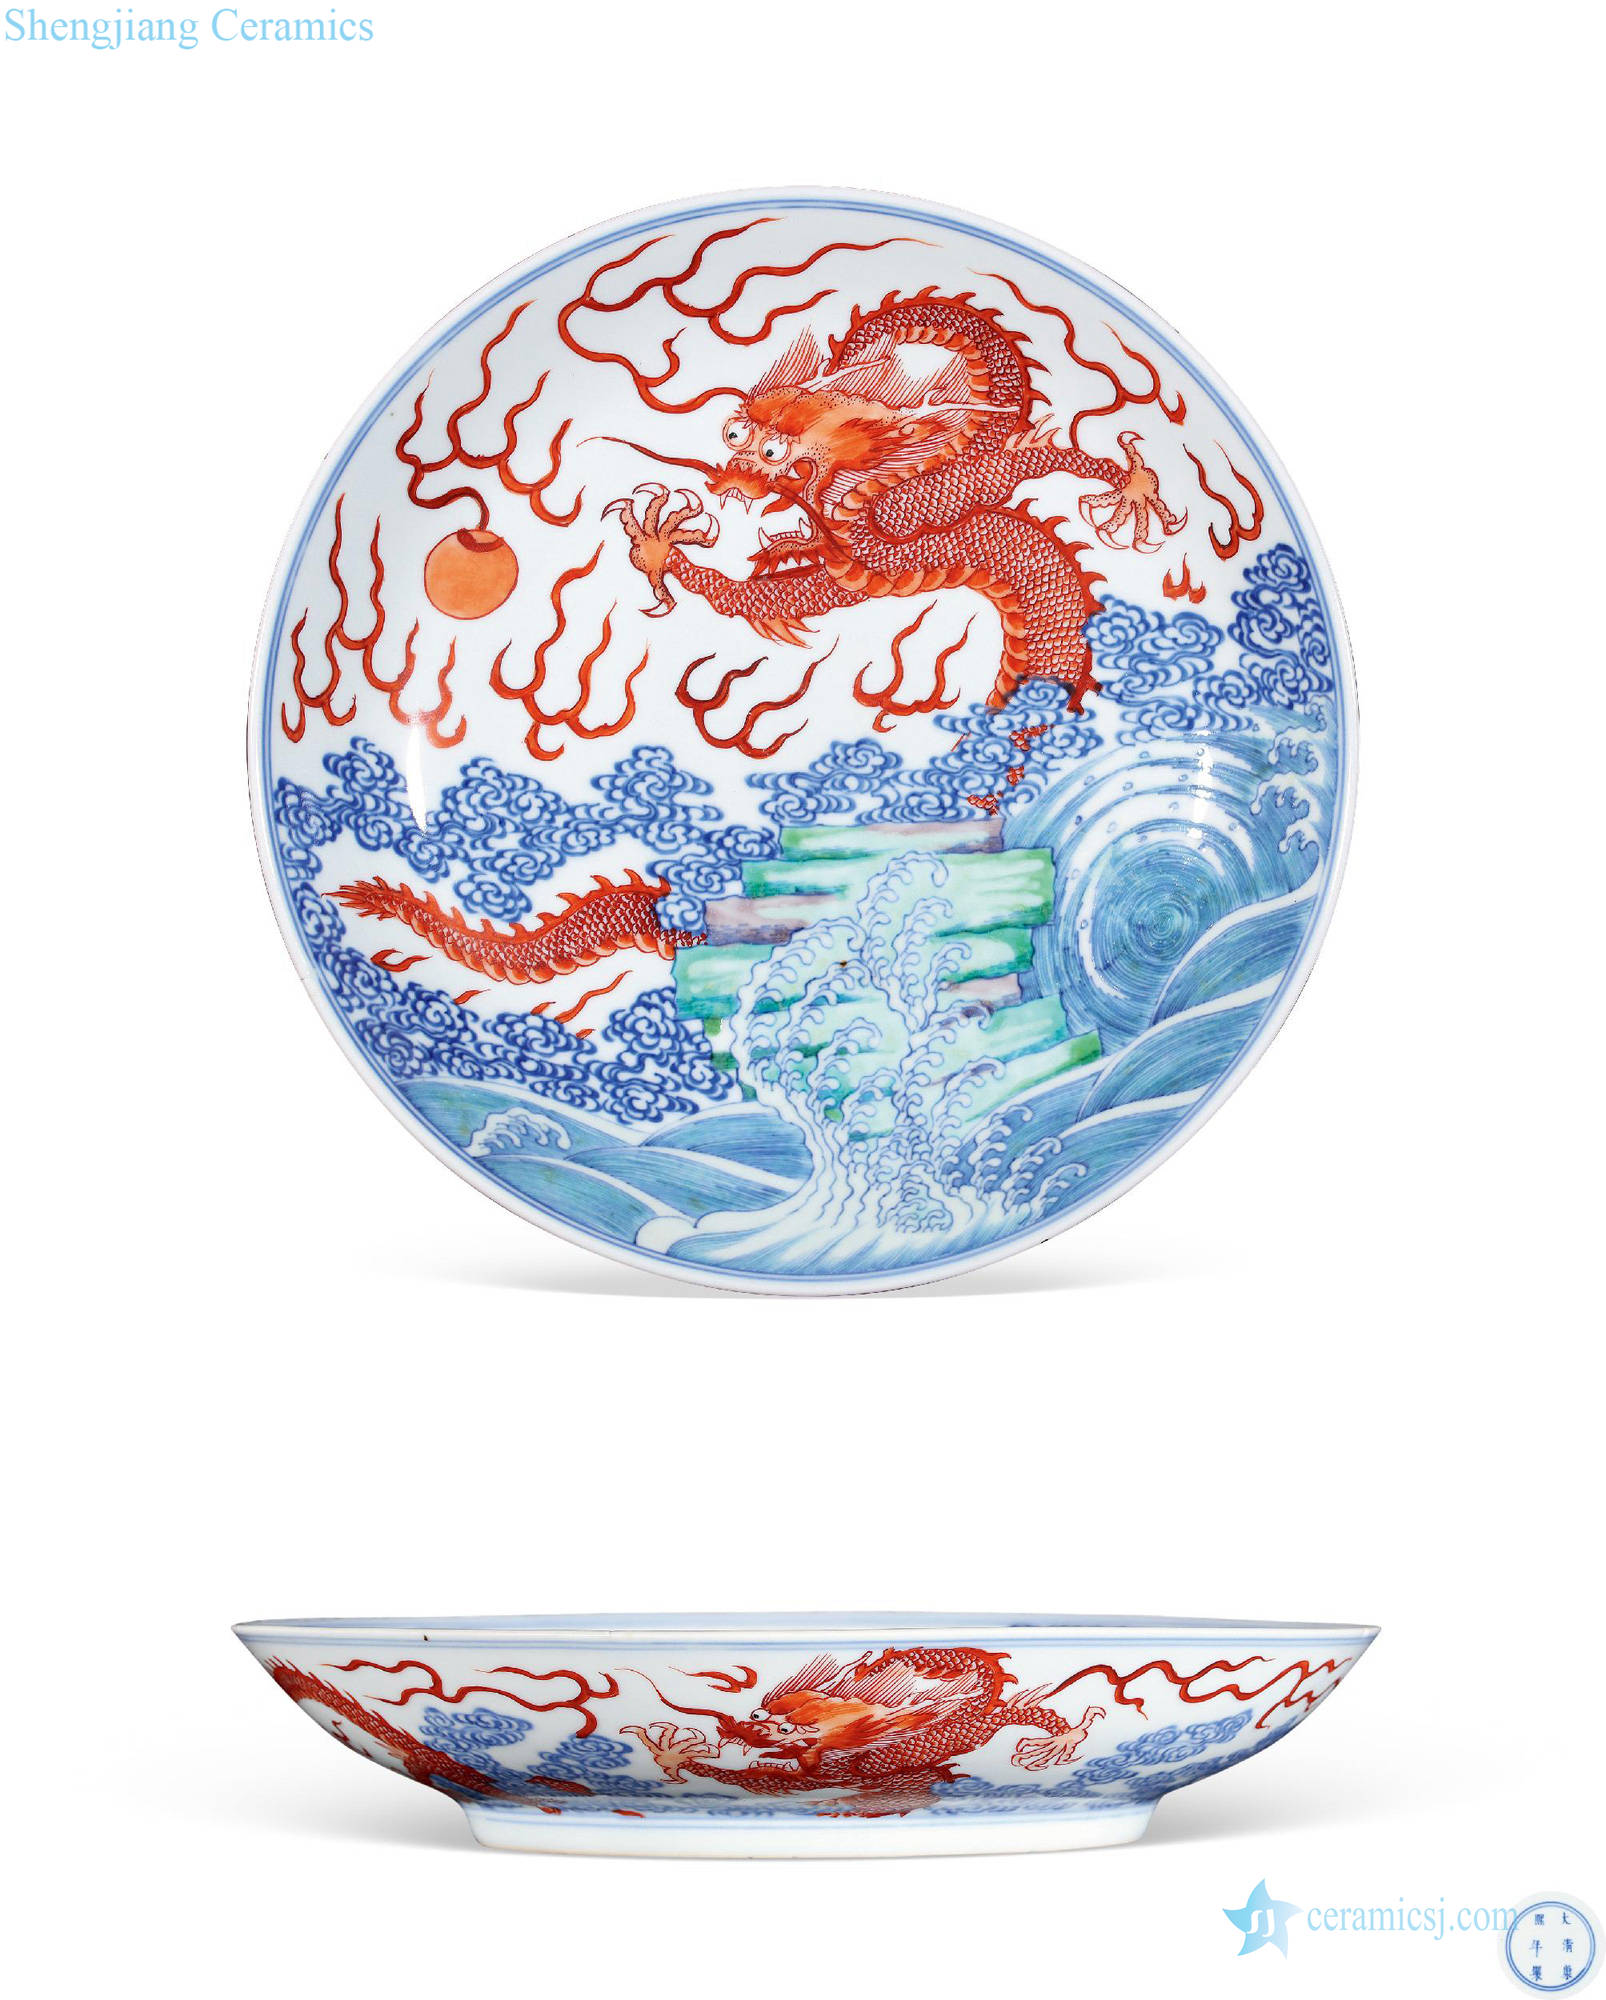 Colour the sea dragon fights of the reign of emperor kangxi